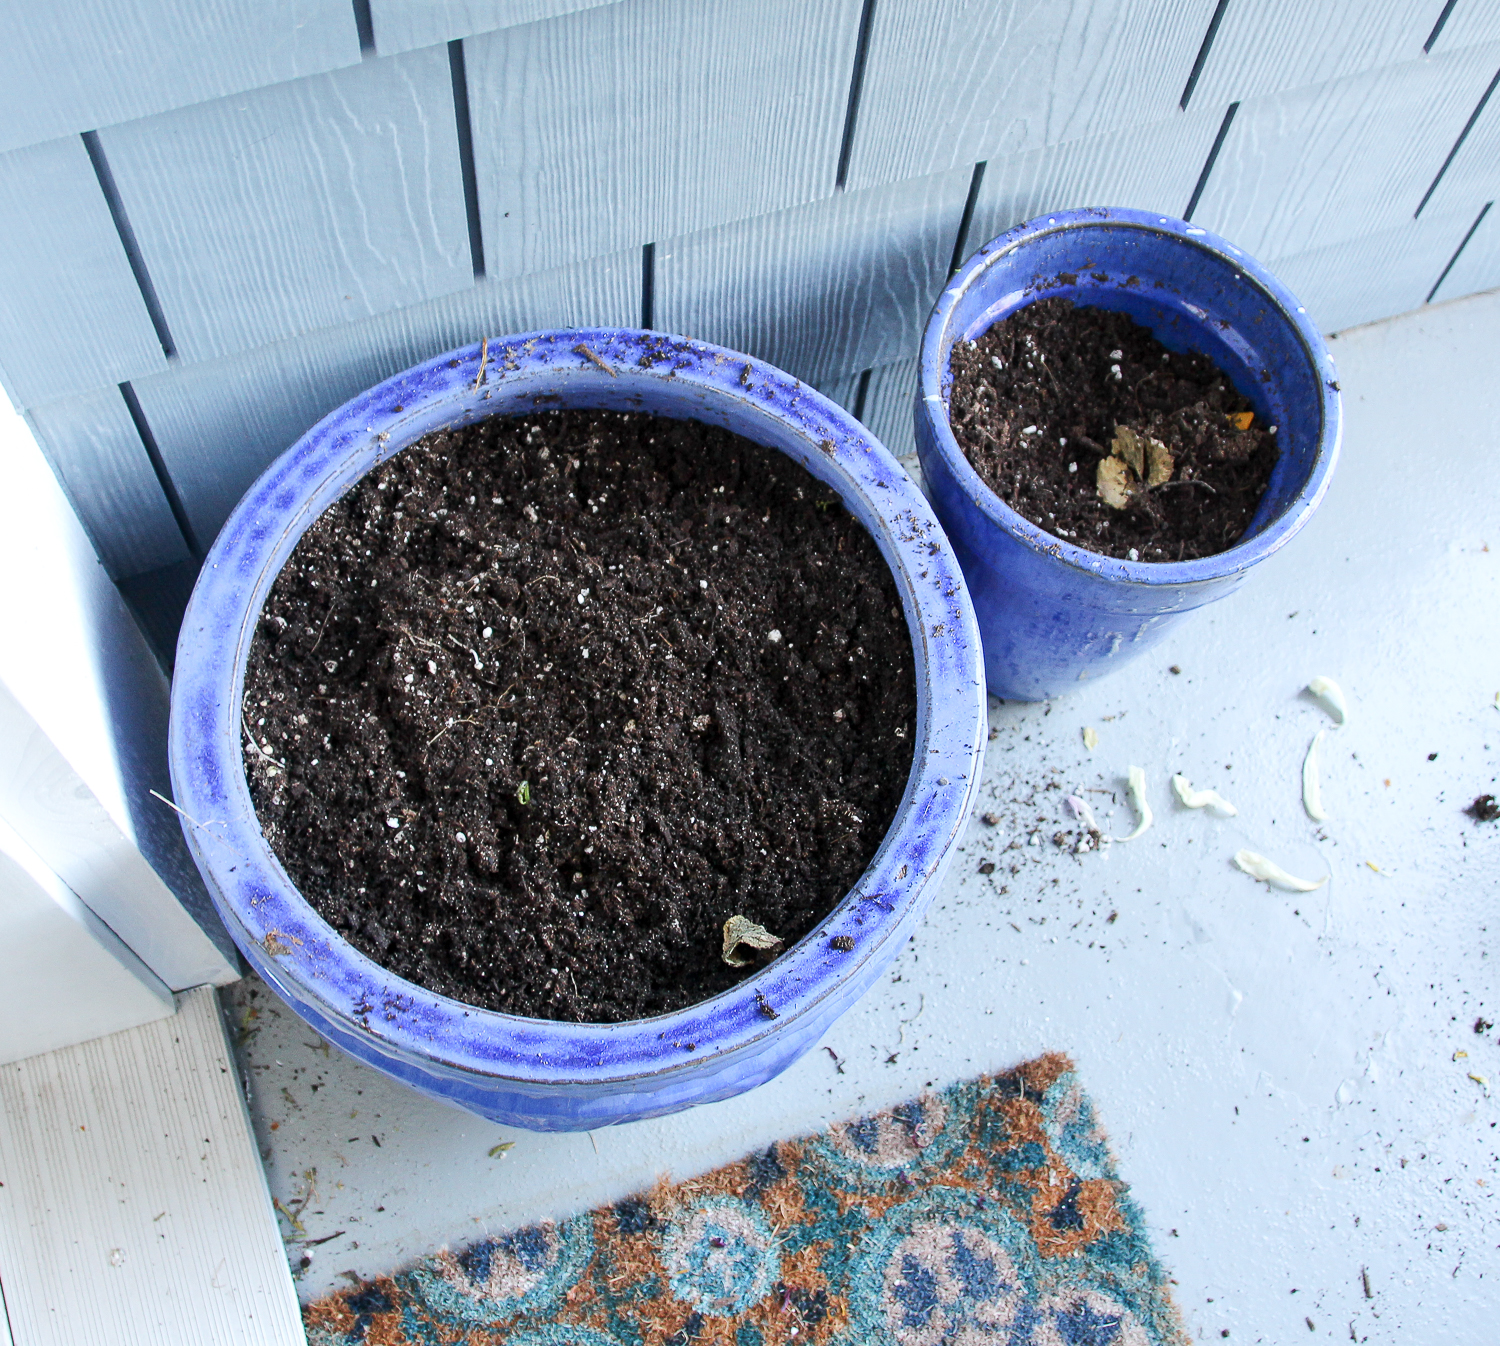 The pots with soil in them on the front porch.